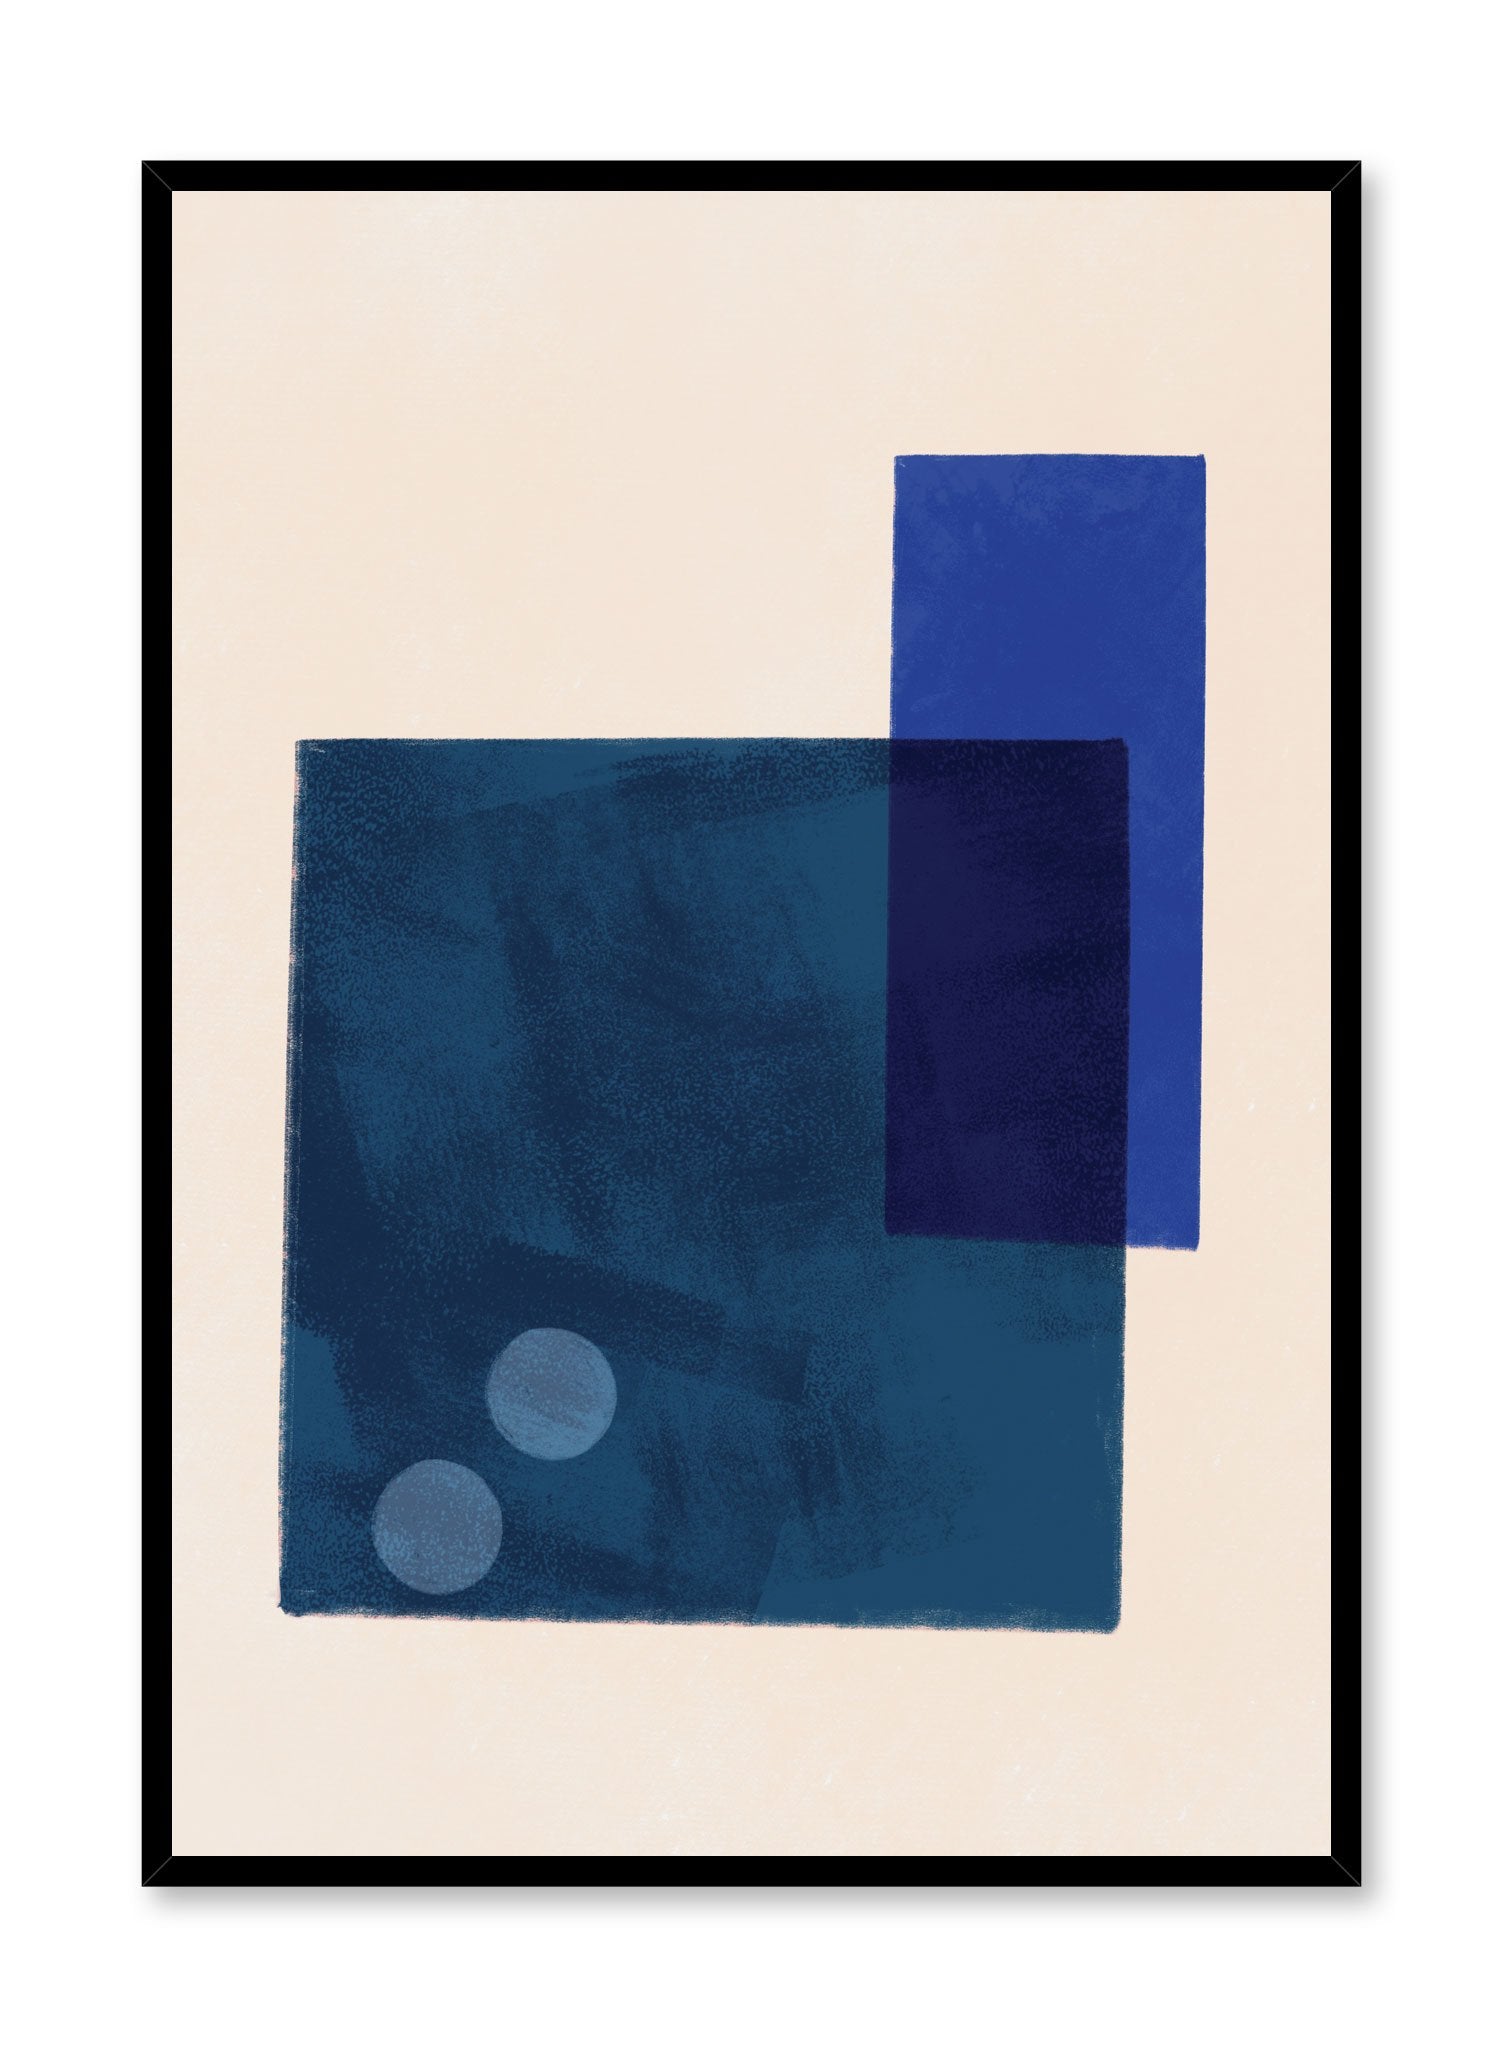 Modern minimalist poster by Opposite Wall with abstract design of Trapped by Toffie Affichiste